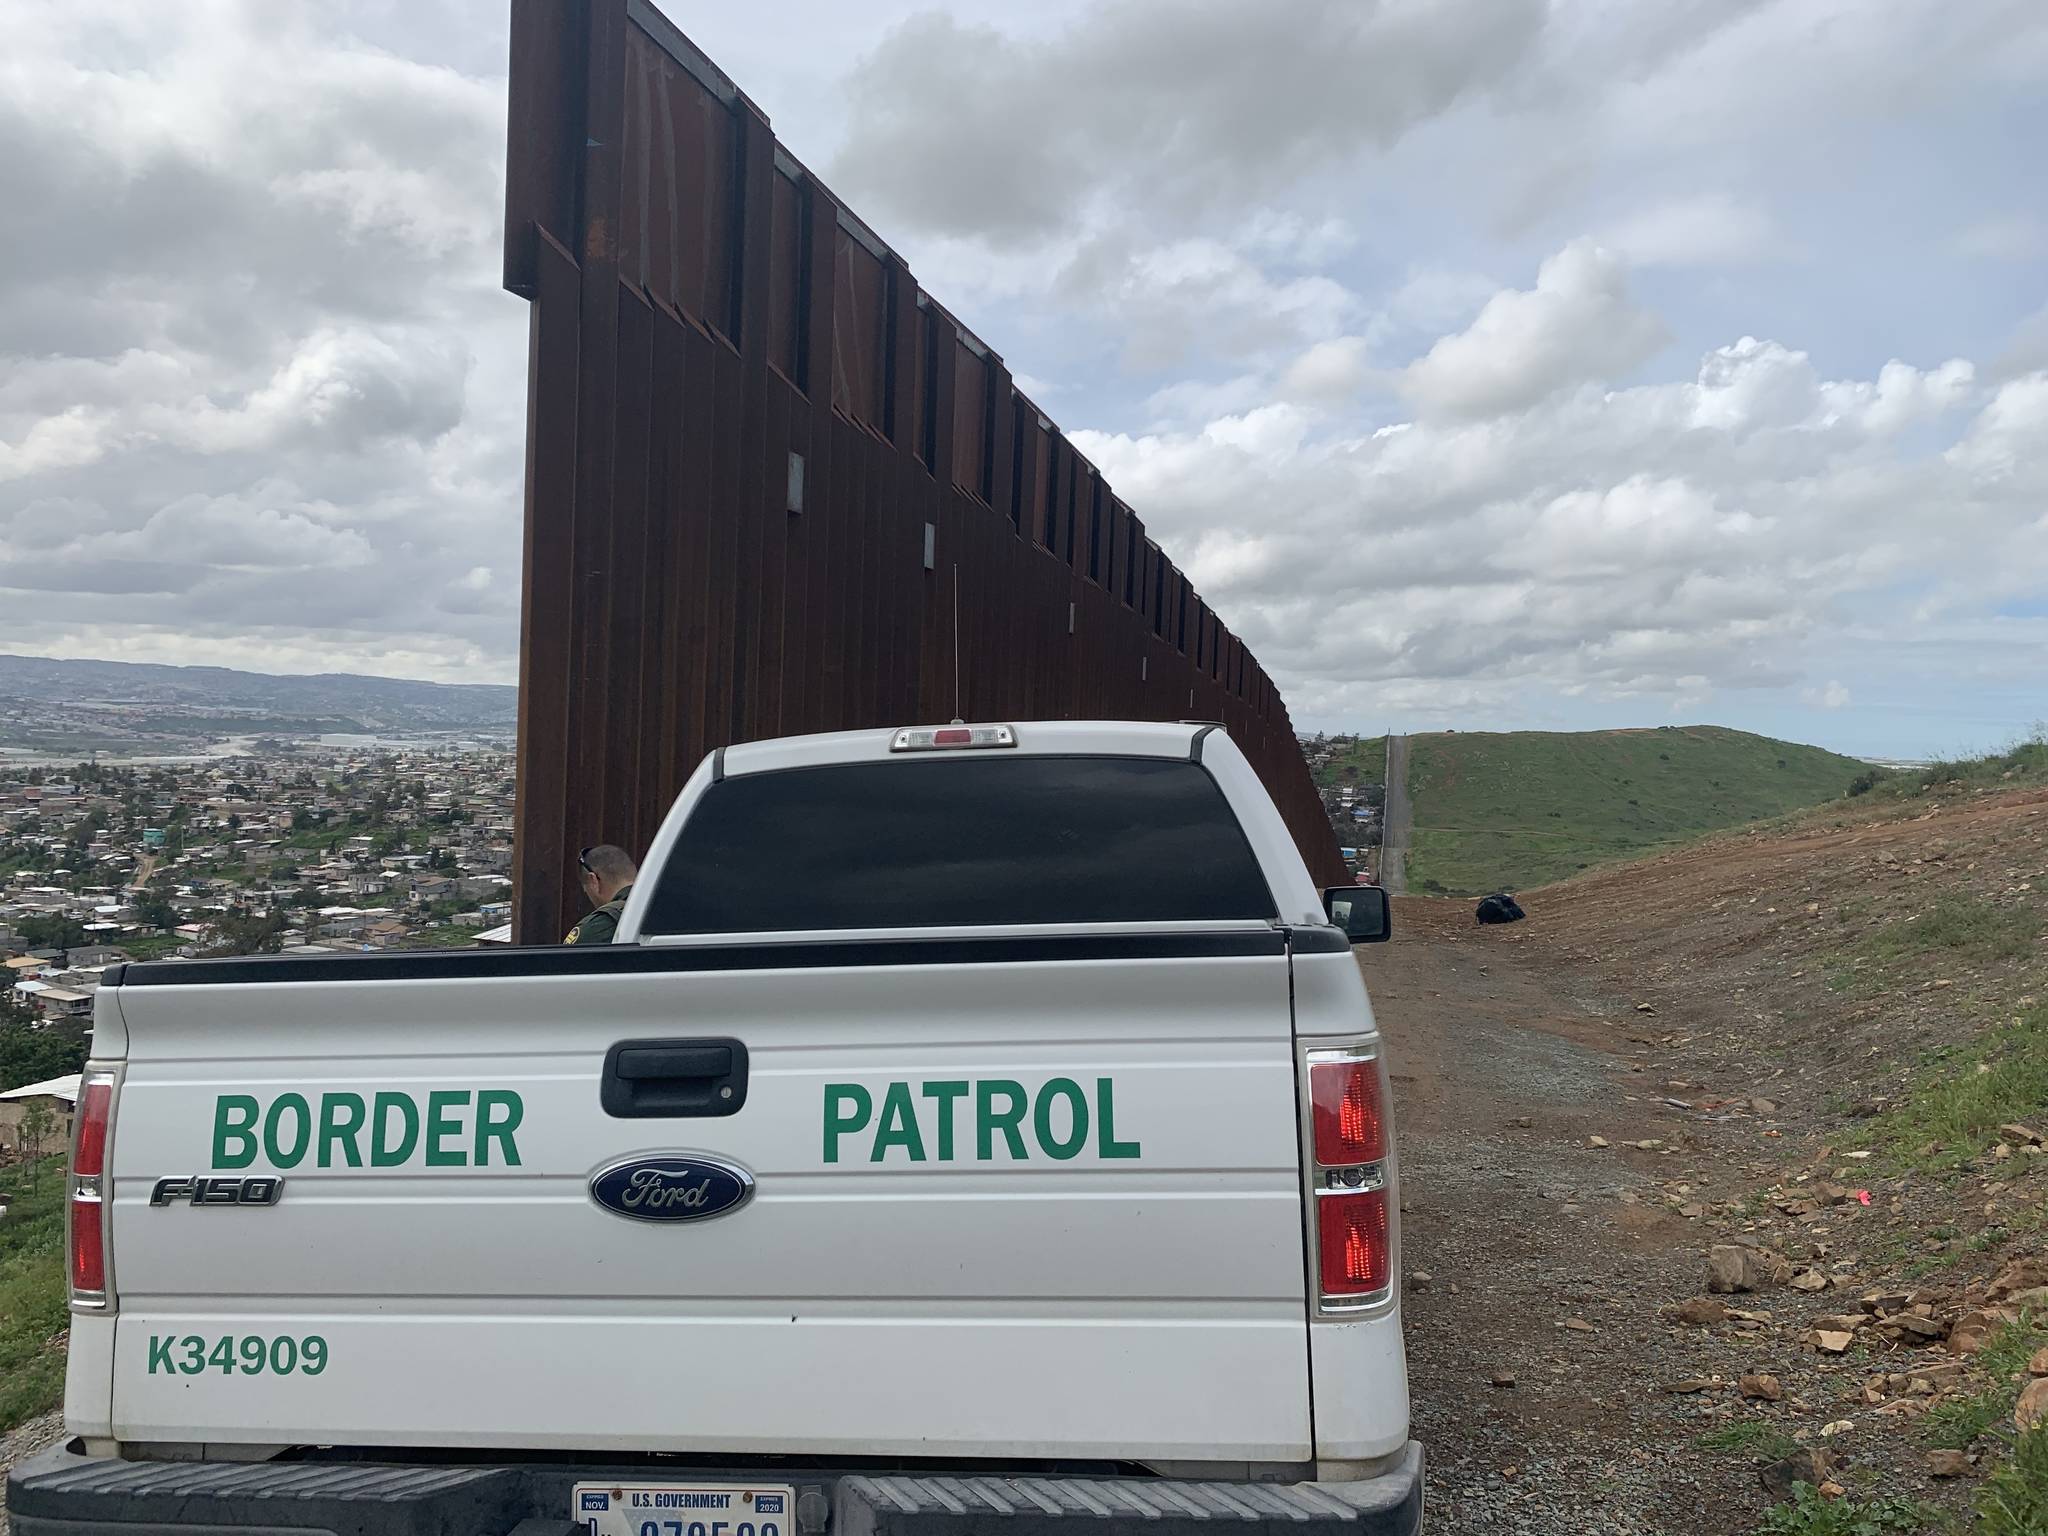 U.S. Border Patrol vehicle along the Border Patrol road in an area where the wall abruptly stops